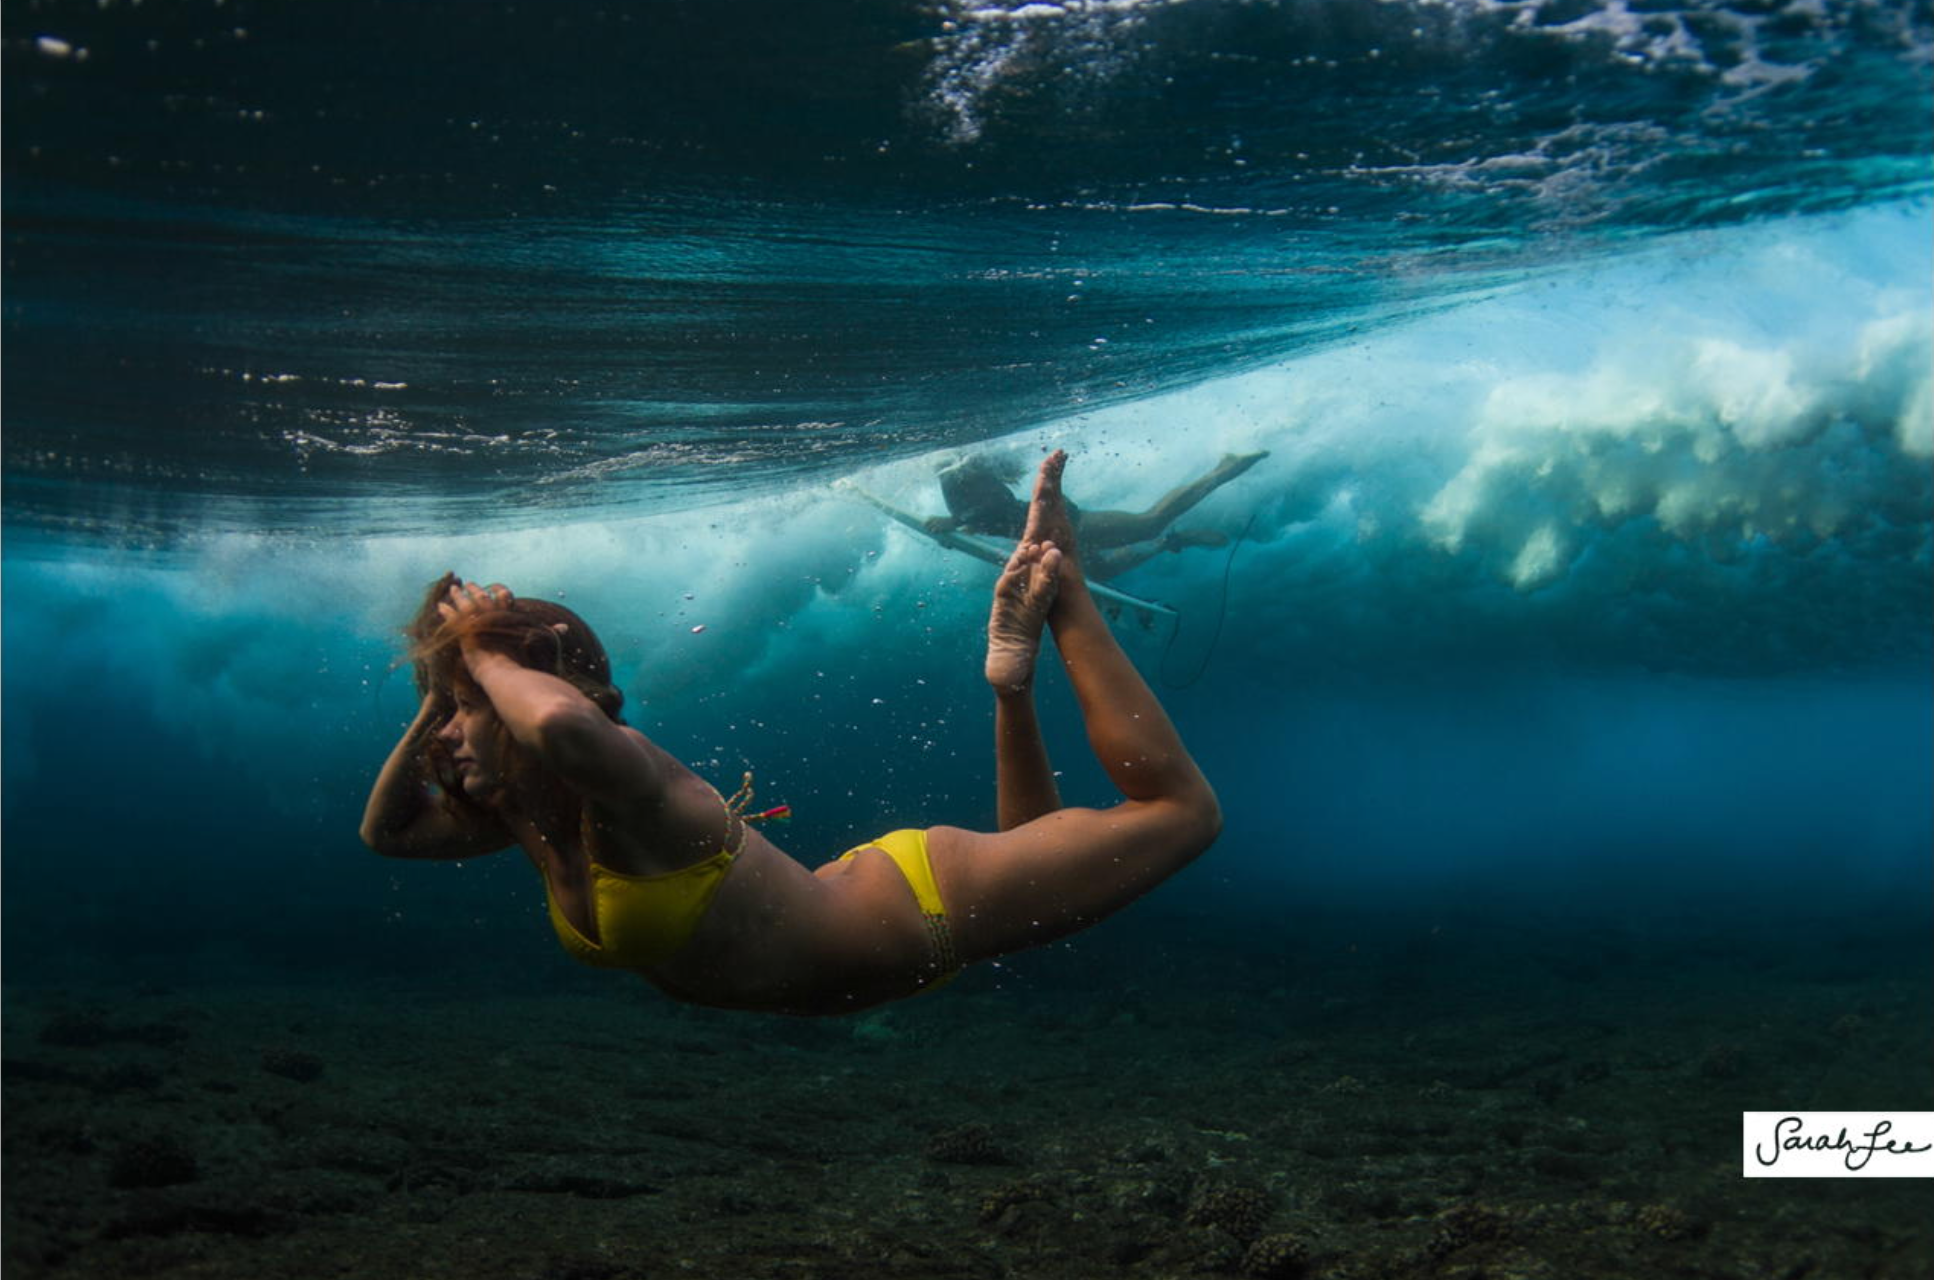 The Beautiful And Surreal Sensuality Of Sarah Lee S Underwater Photos